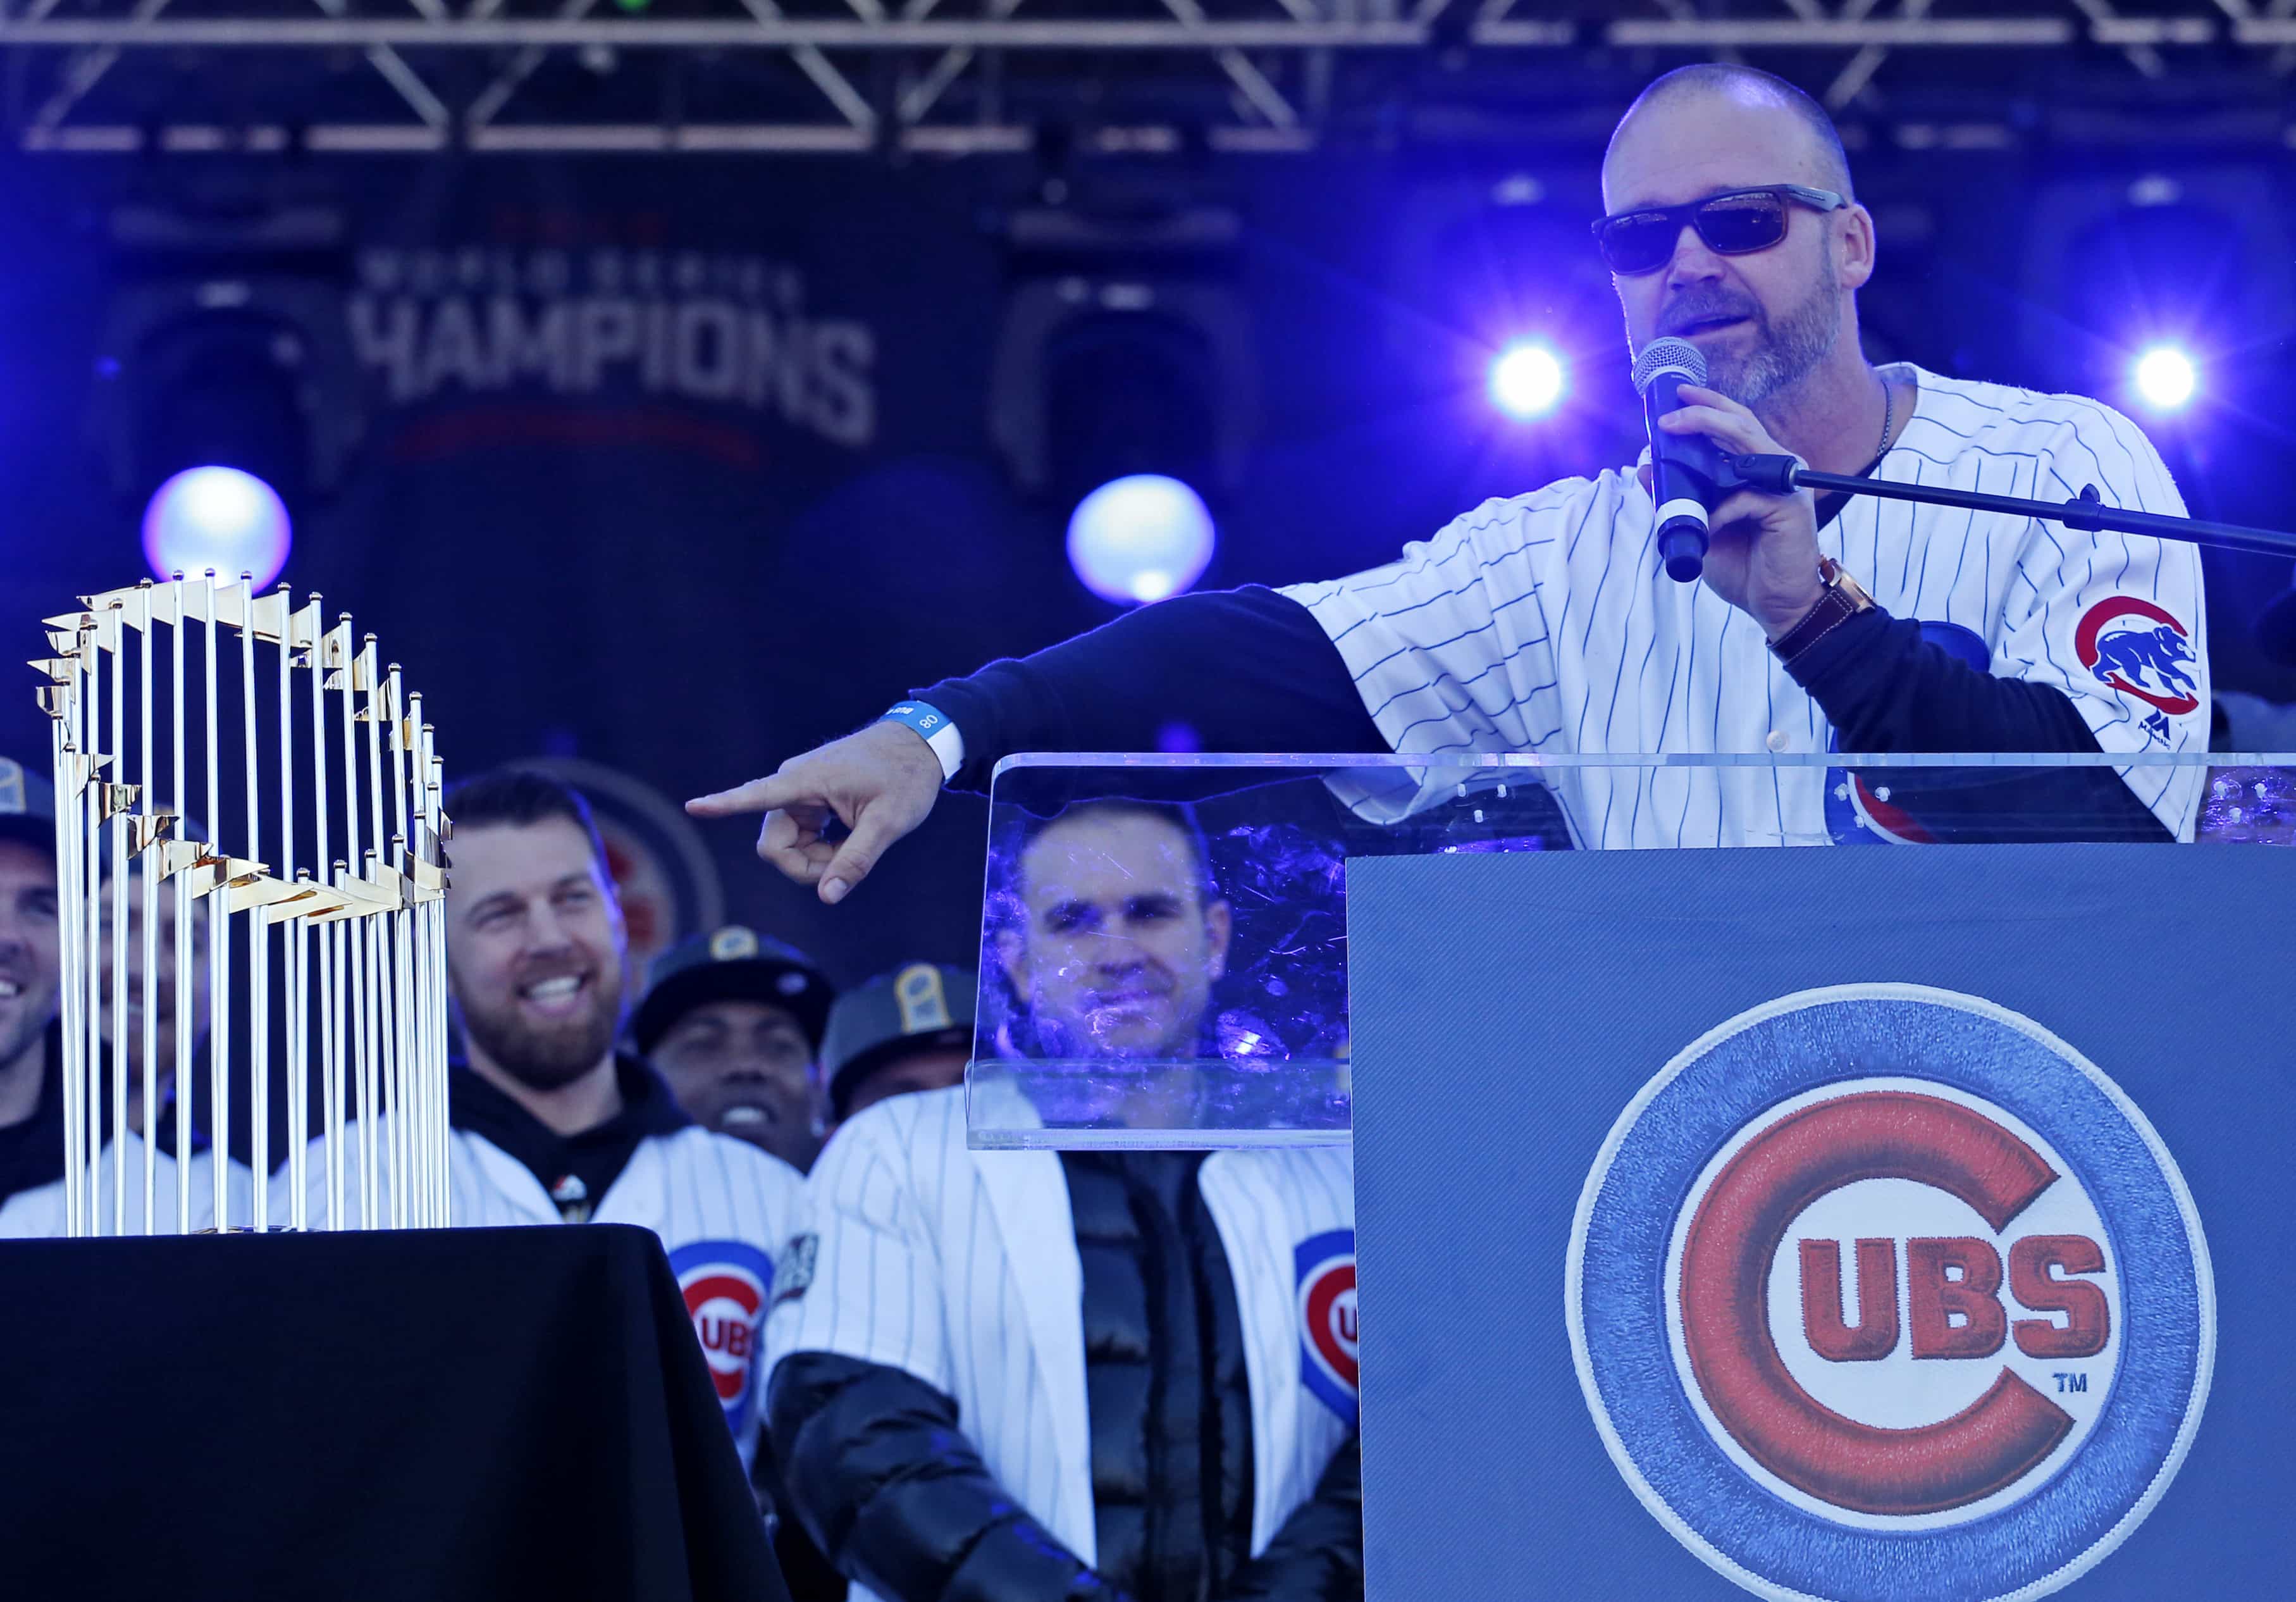 Cubs' World Series Trophy Coming to Rockford